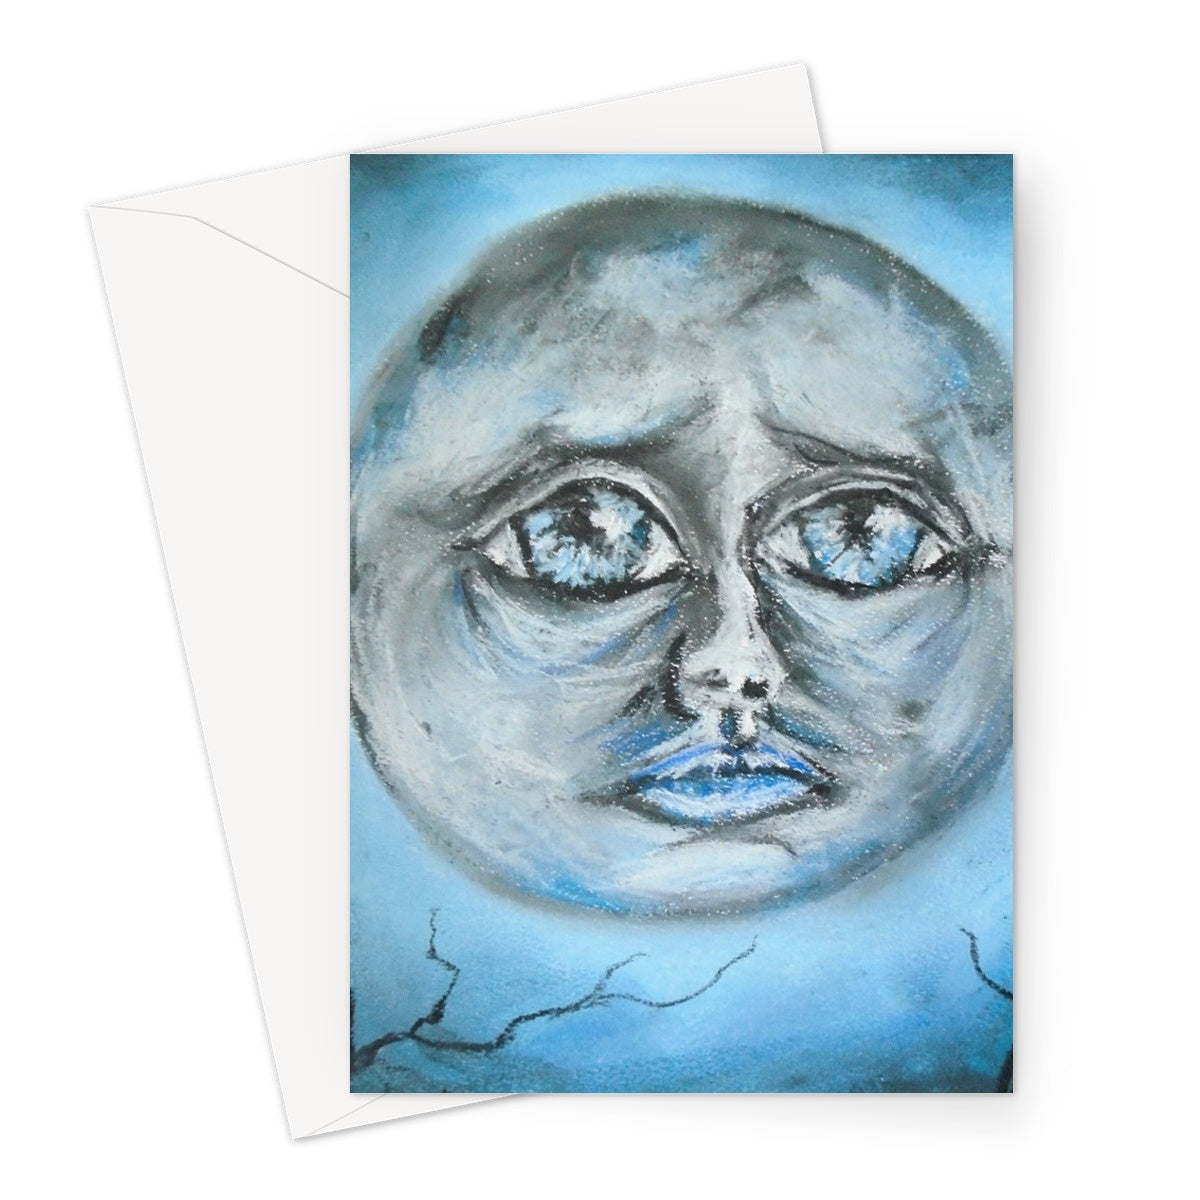 Poet and her Soul Speaking Paintings ~ prints, originals and more  A blue night Of whispering sorrow Holding the light And a pointy arrow Pointing to tomorrow  Original Artwork and Poetry of Artist Jen Shearer  This is a original painting printed on product.